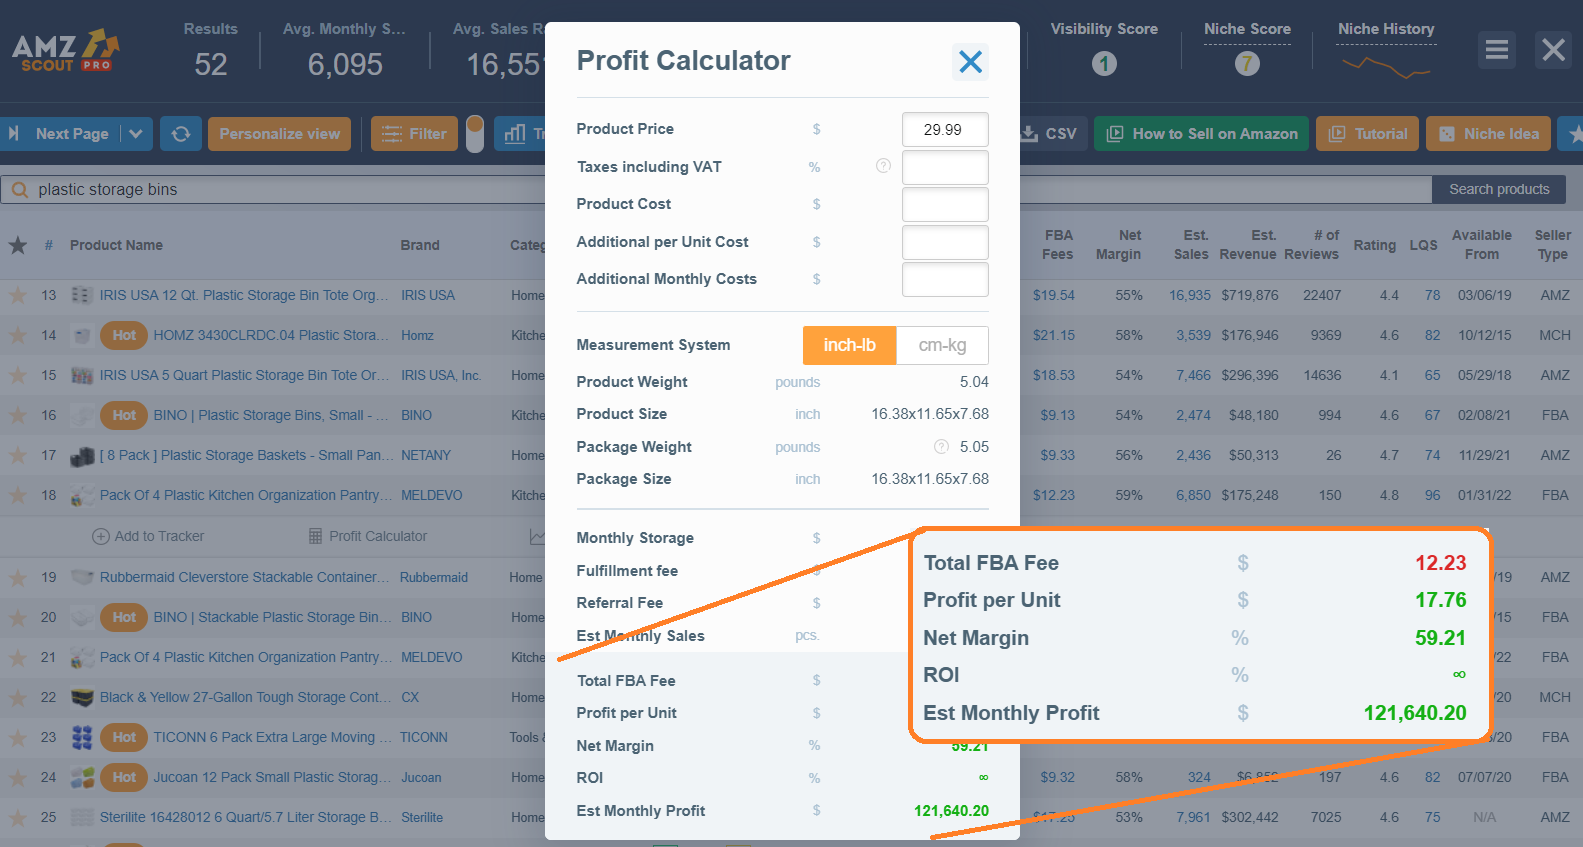 Analyze the profitability of a product with AMZScout